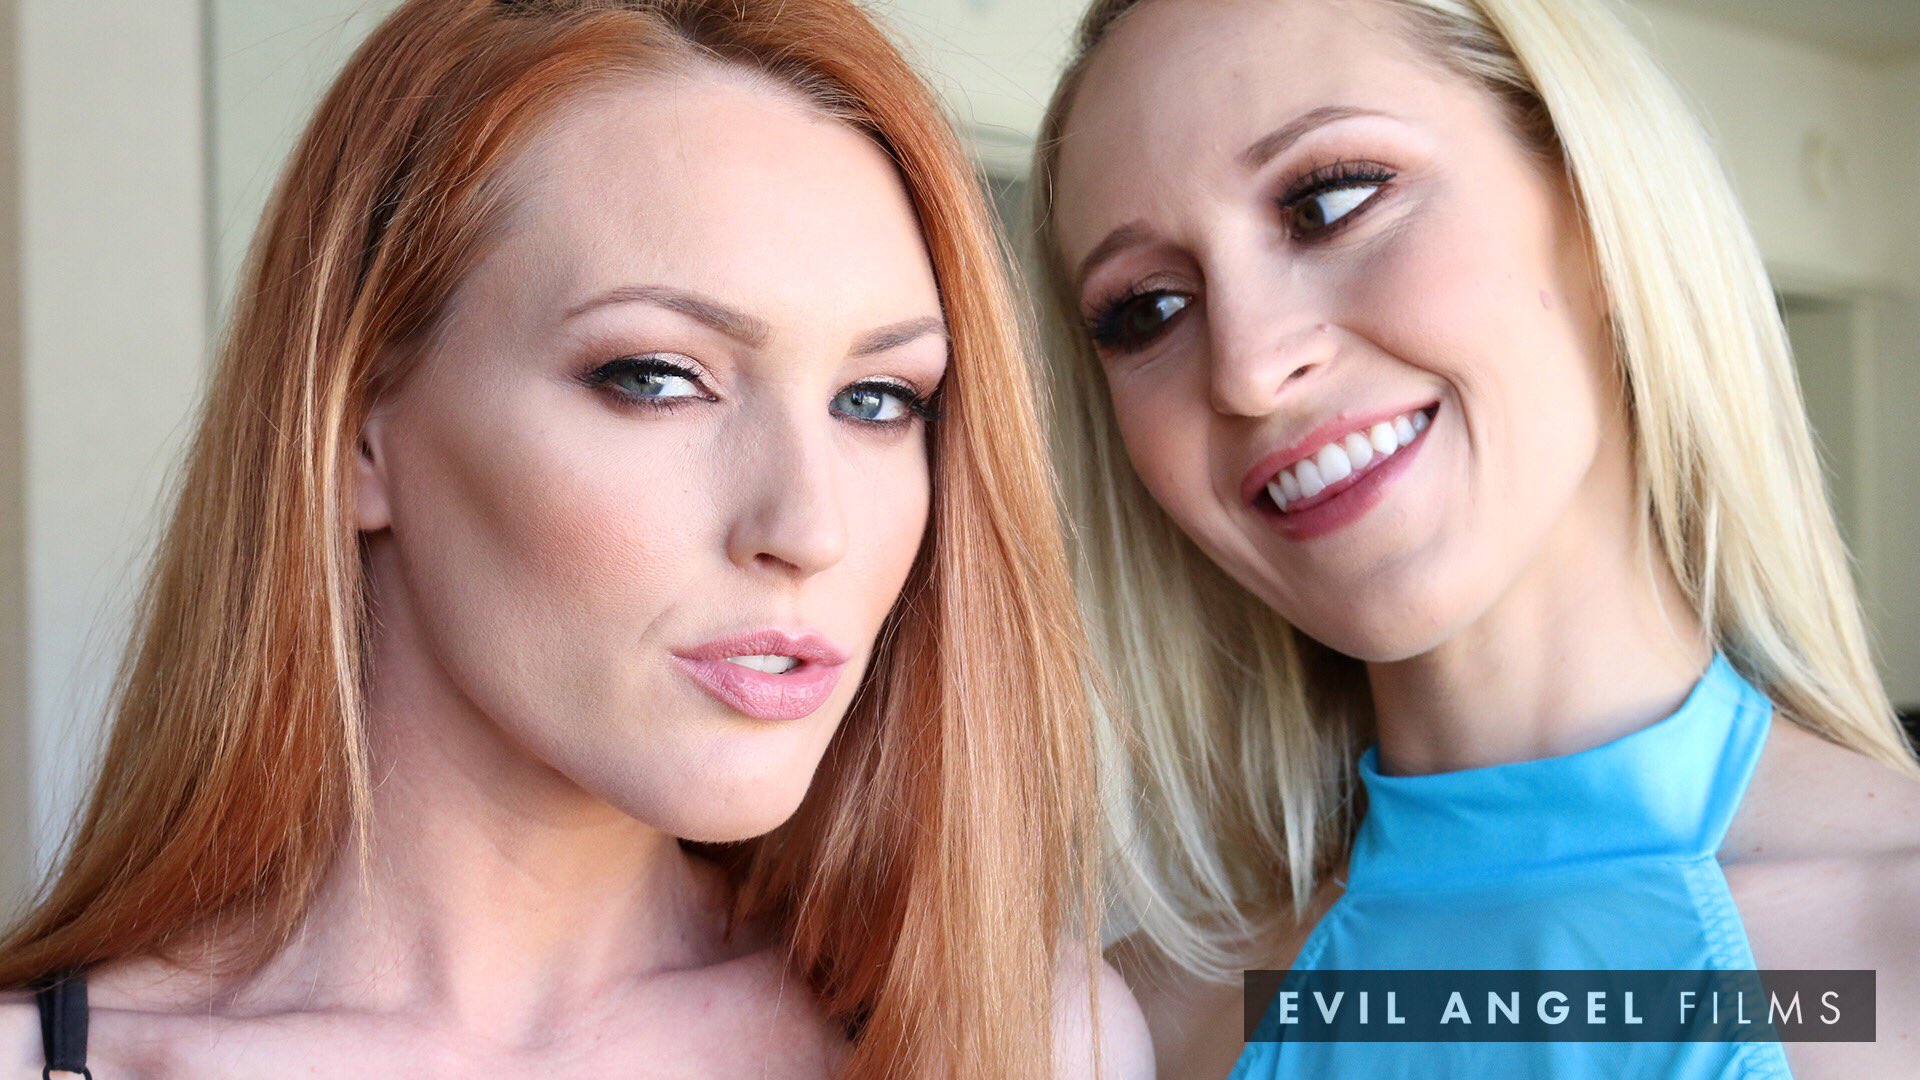 Caption this photo with @JennyBlighe from #CamGirlsTheMovie by @EvilAngelVideo 😊💕 https://t.co/52RbN